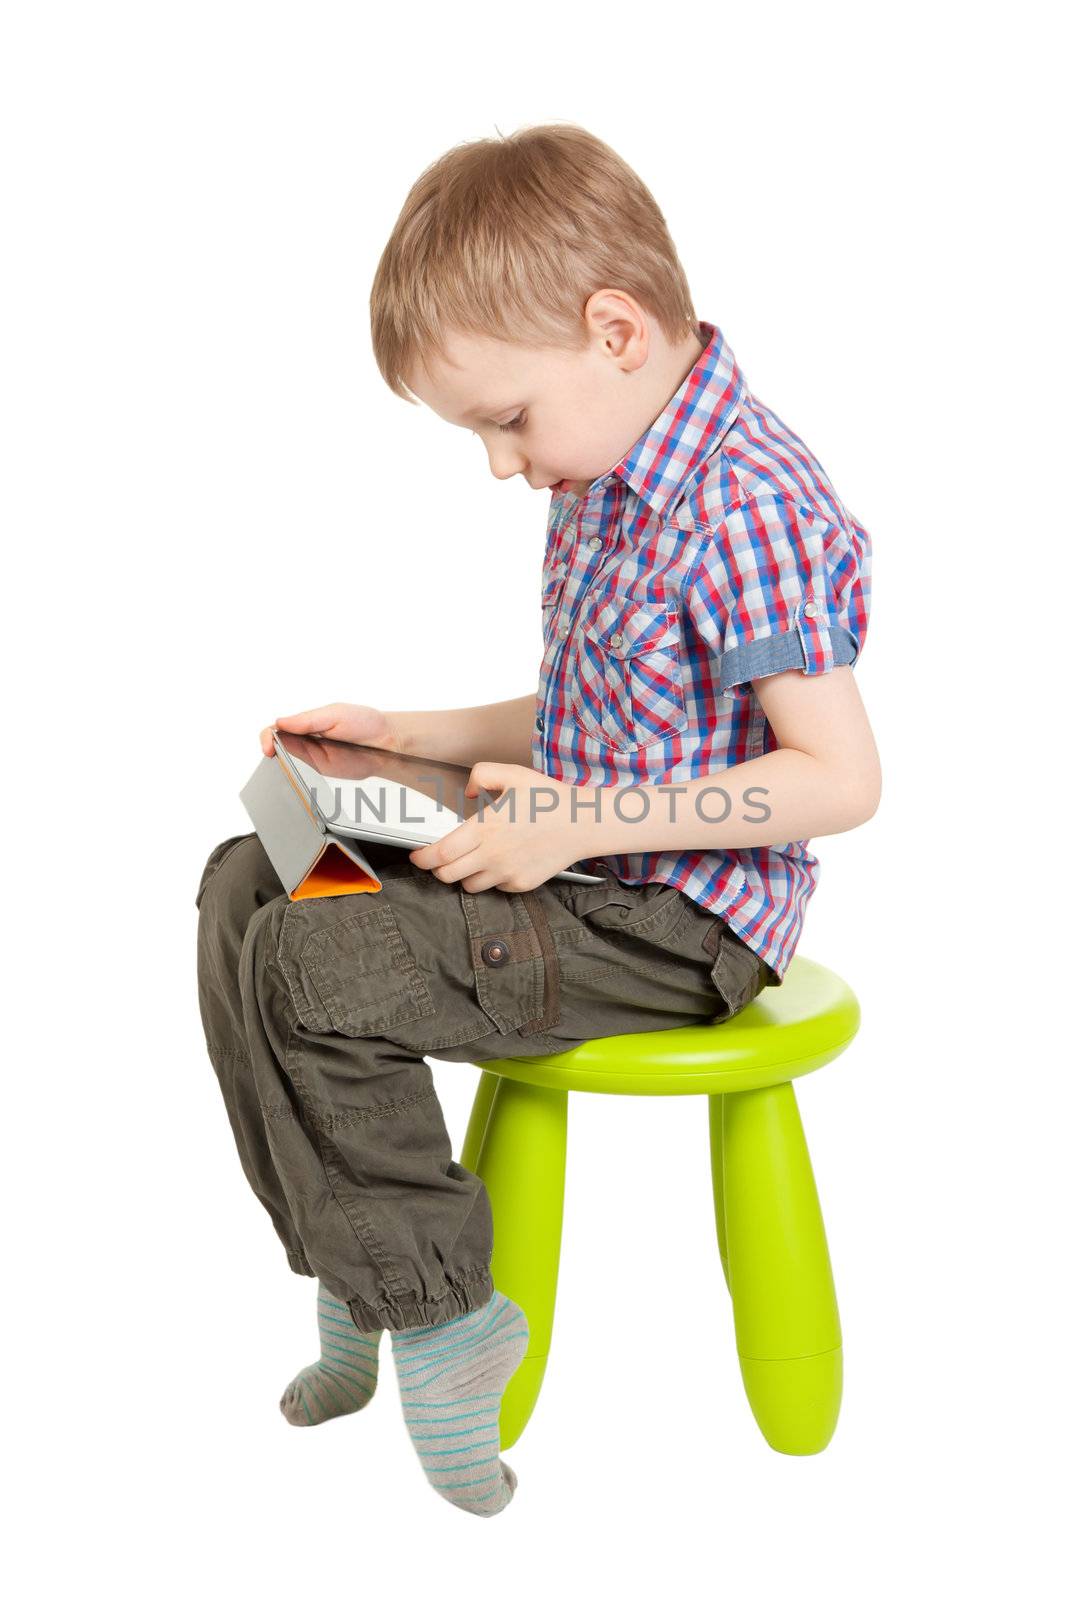 boy with a Tablet PC sitting on a chair in the children's green studio isolated on white background